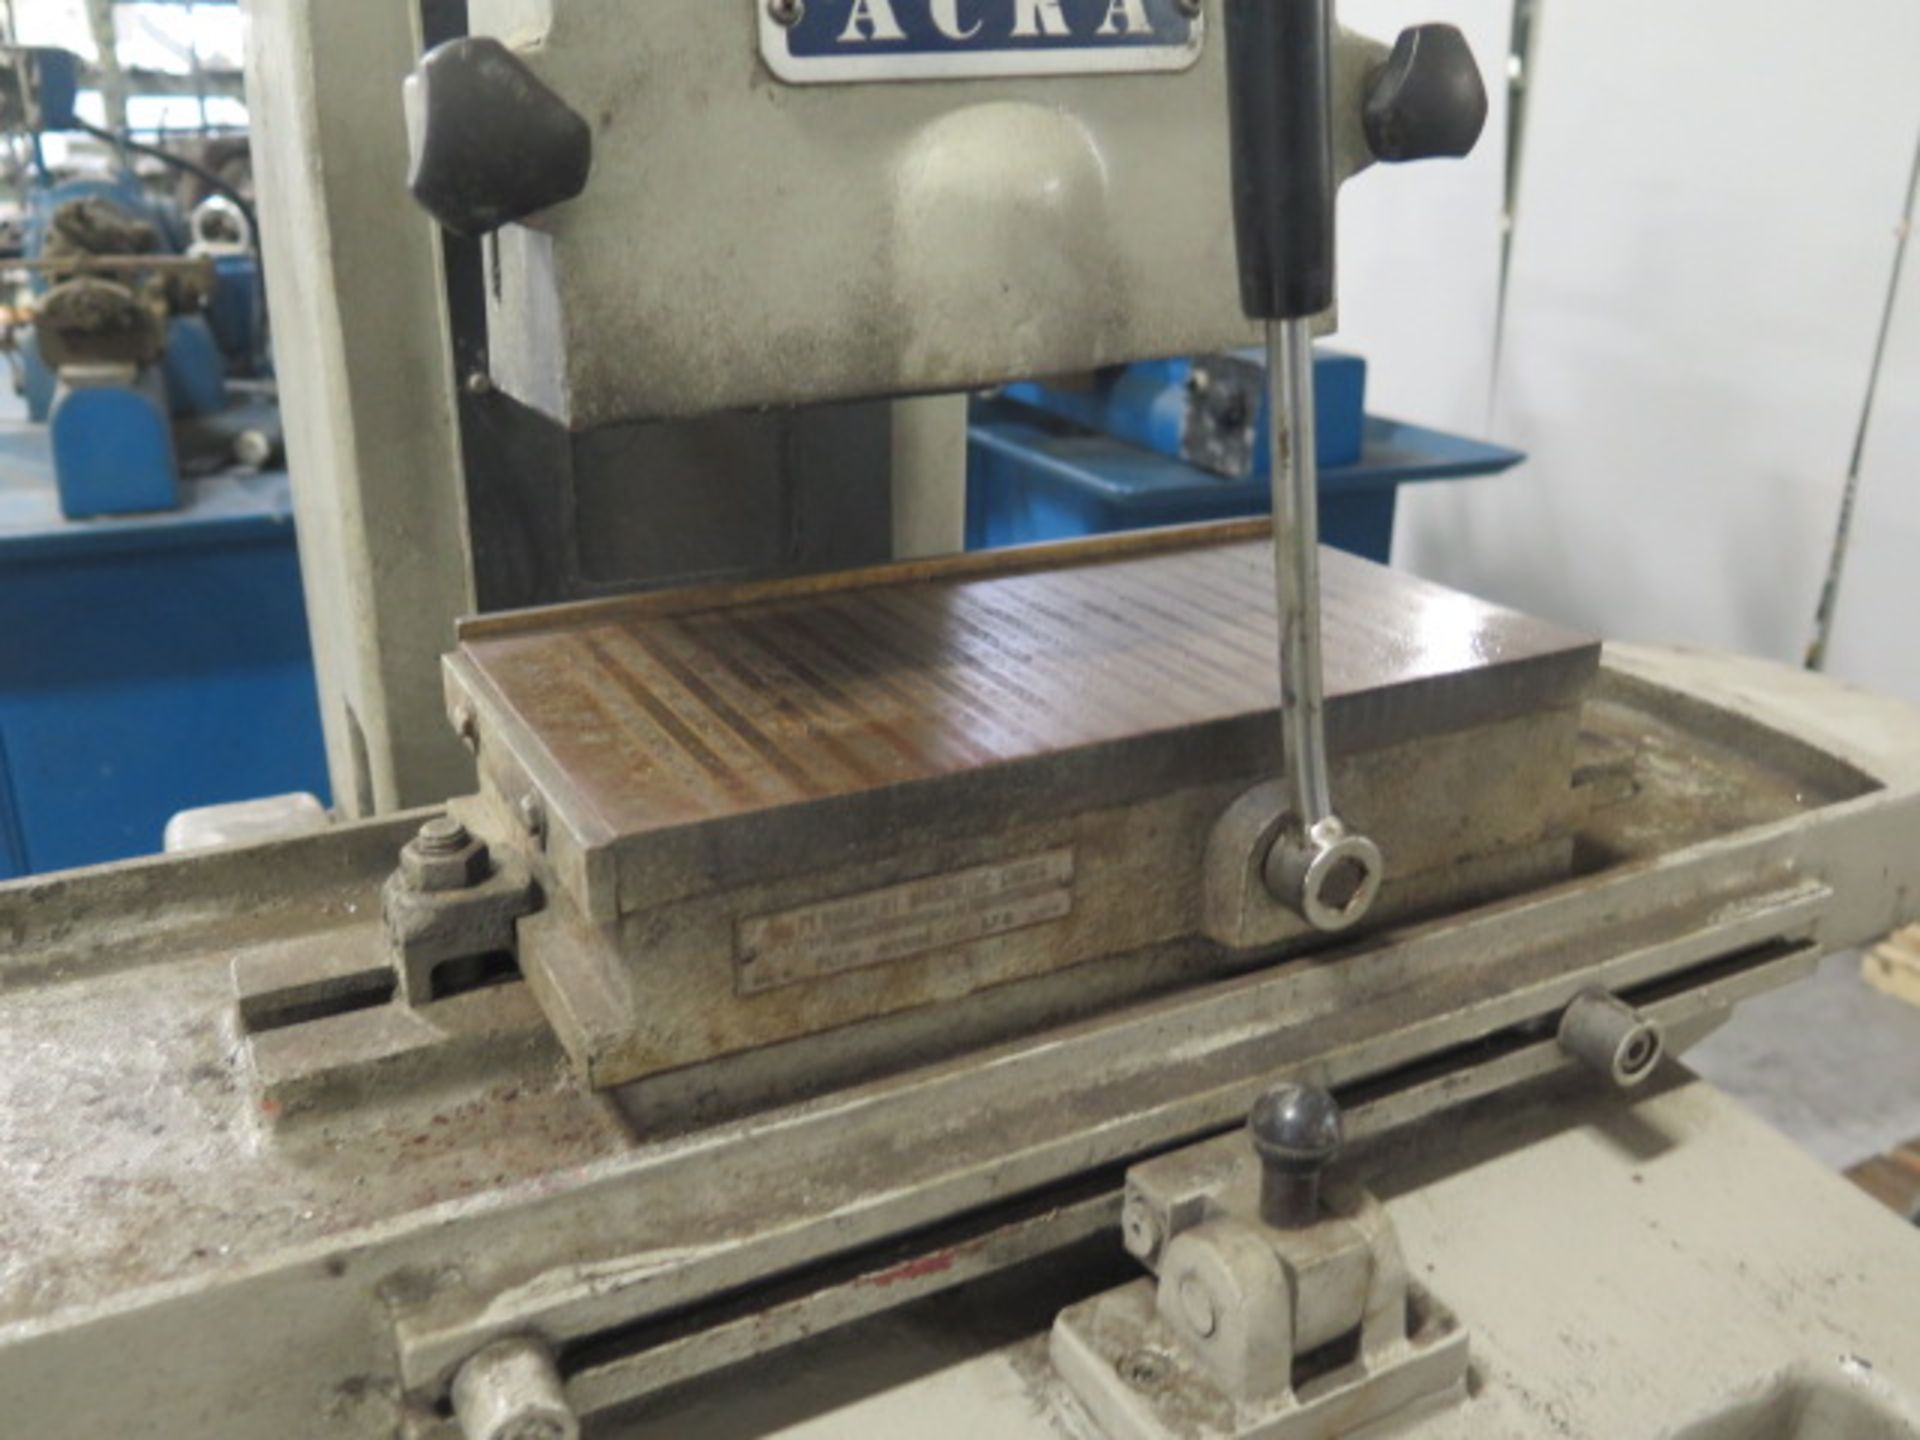 Acra Kong Kuang mdl. RS-612 6” x 12” Surface Grinder s/n 612012 w/ Magnetic Chuck - Image 5 of 7